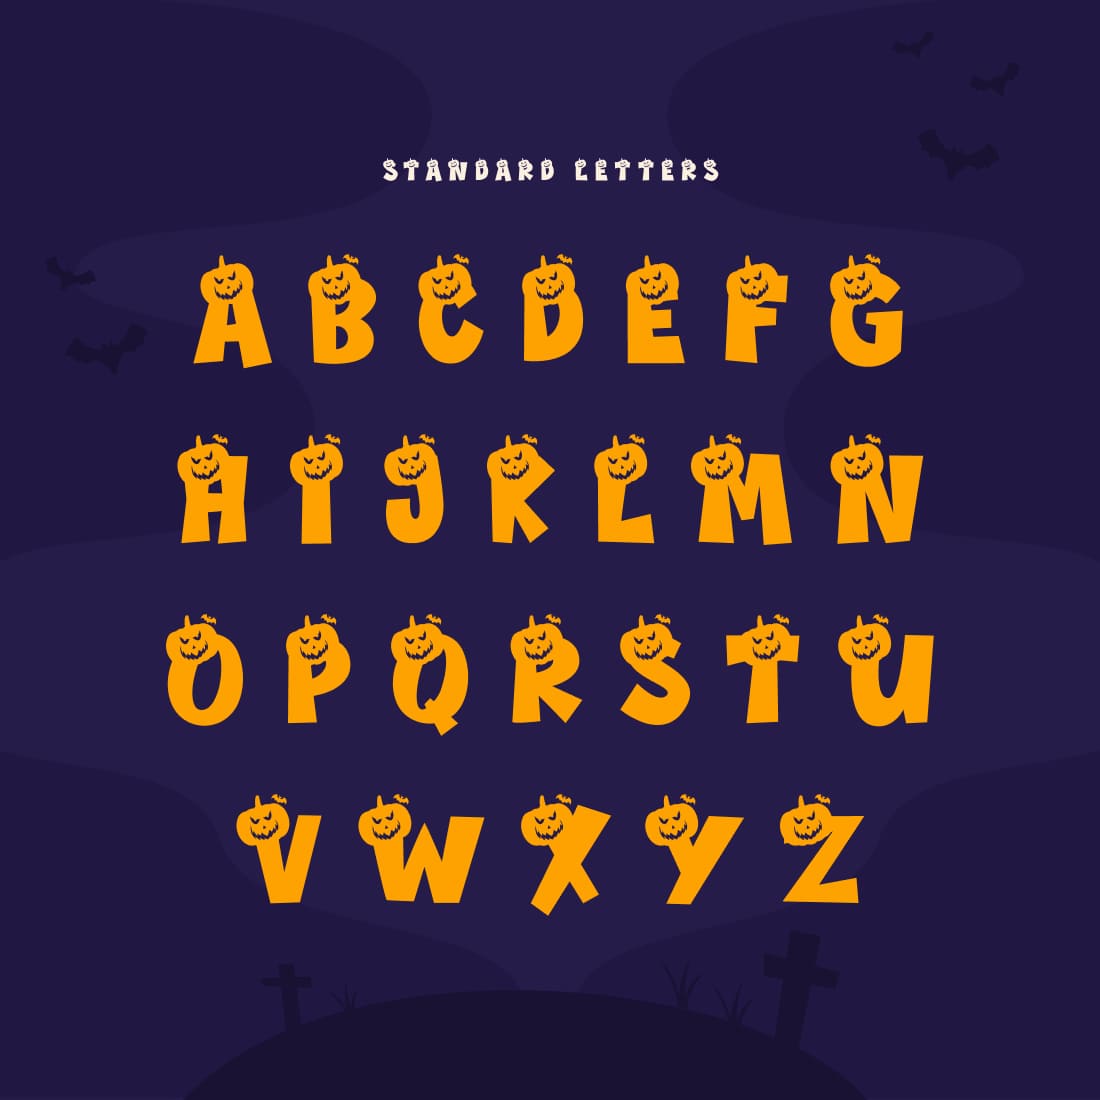 Bagonk Helloween Free Font MasterBundles Preview with Standart Letters.